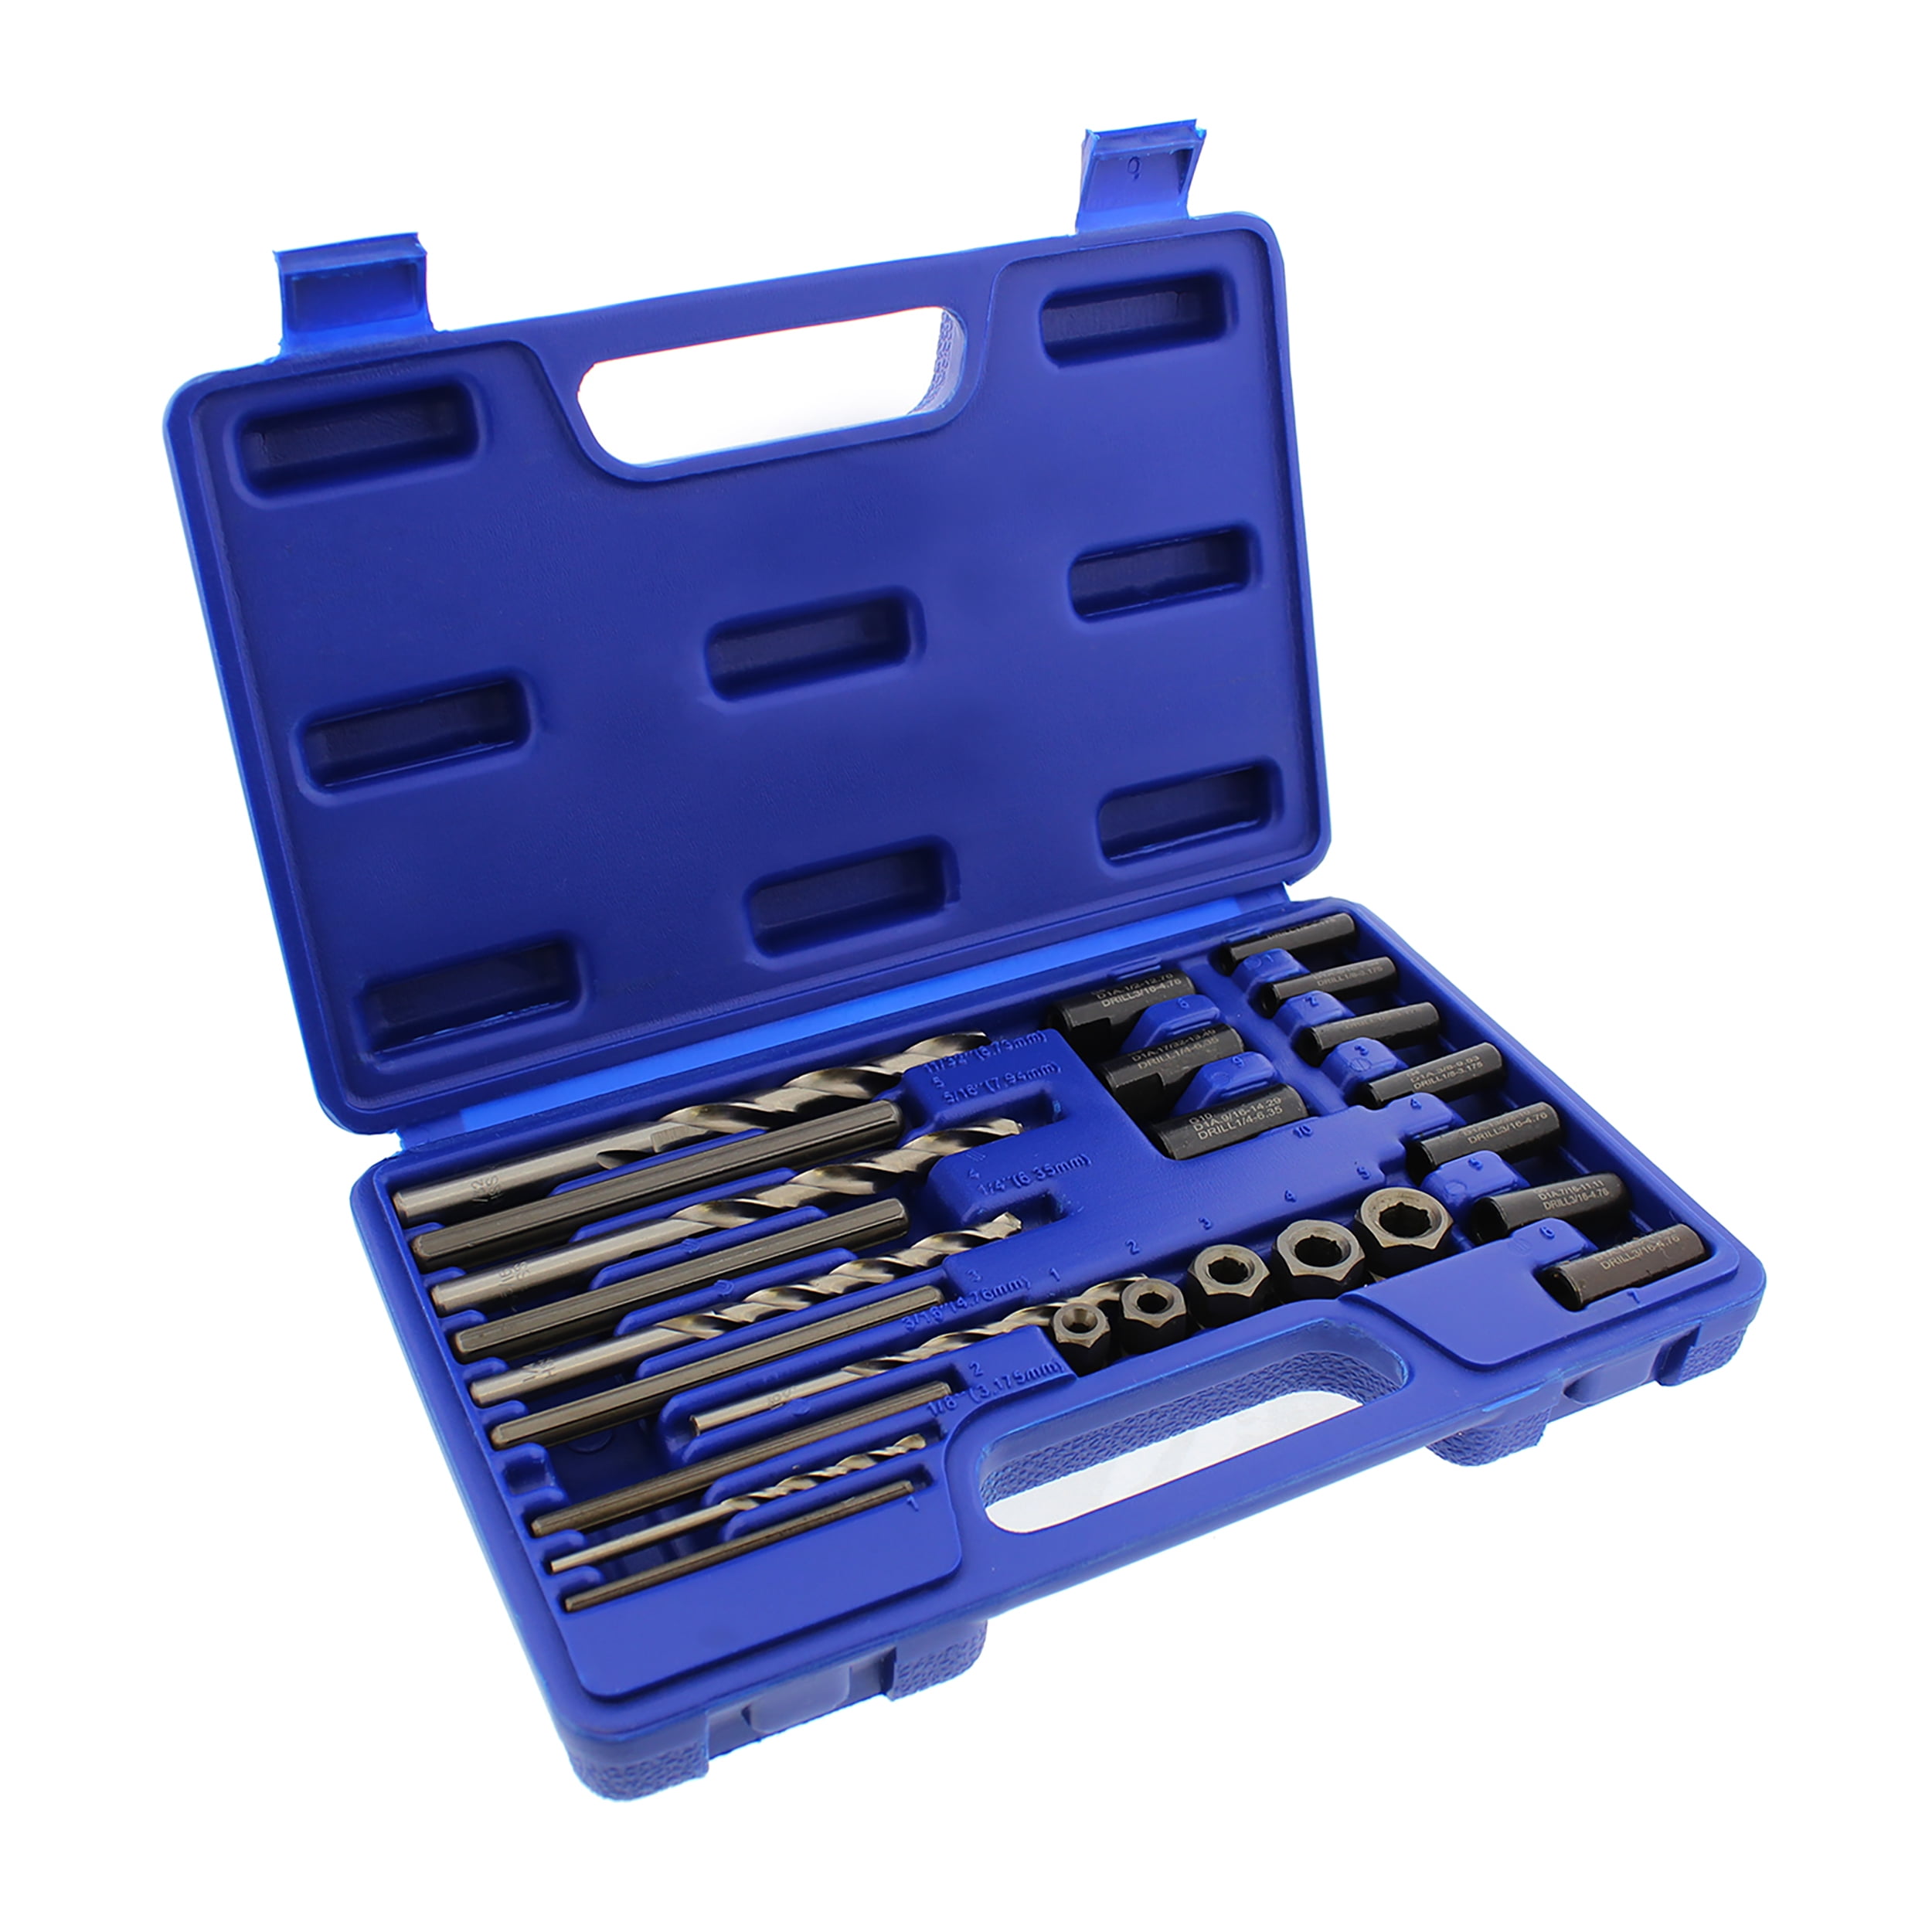 Buy Un-Do-It Tool 3-Pack, One-Way screw remover set, #6-14